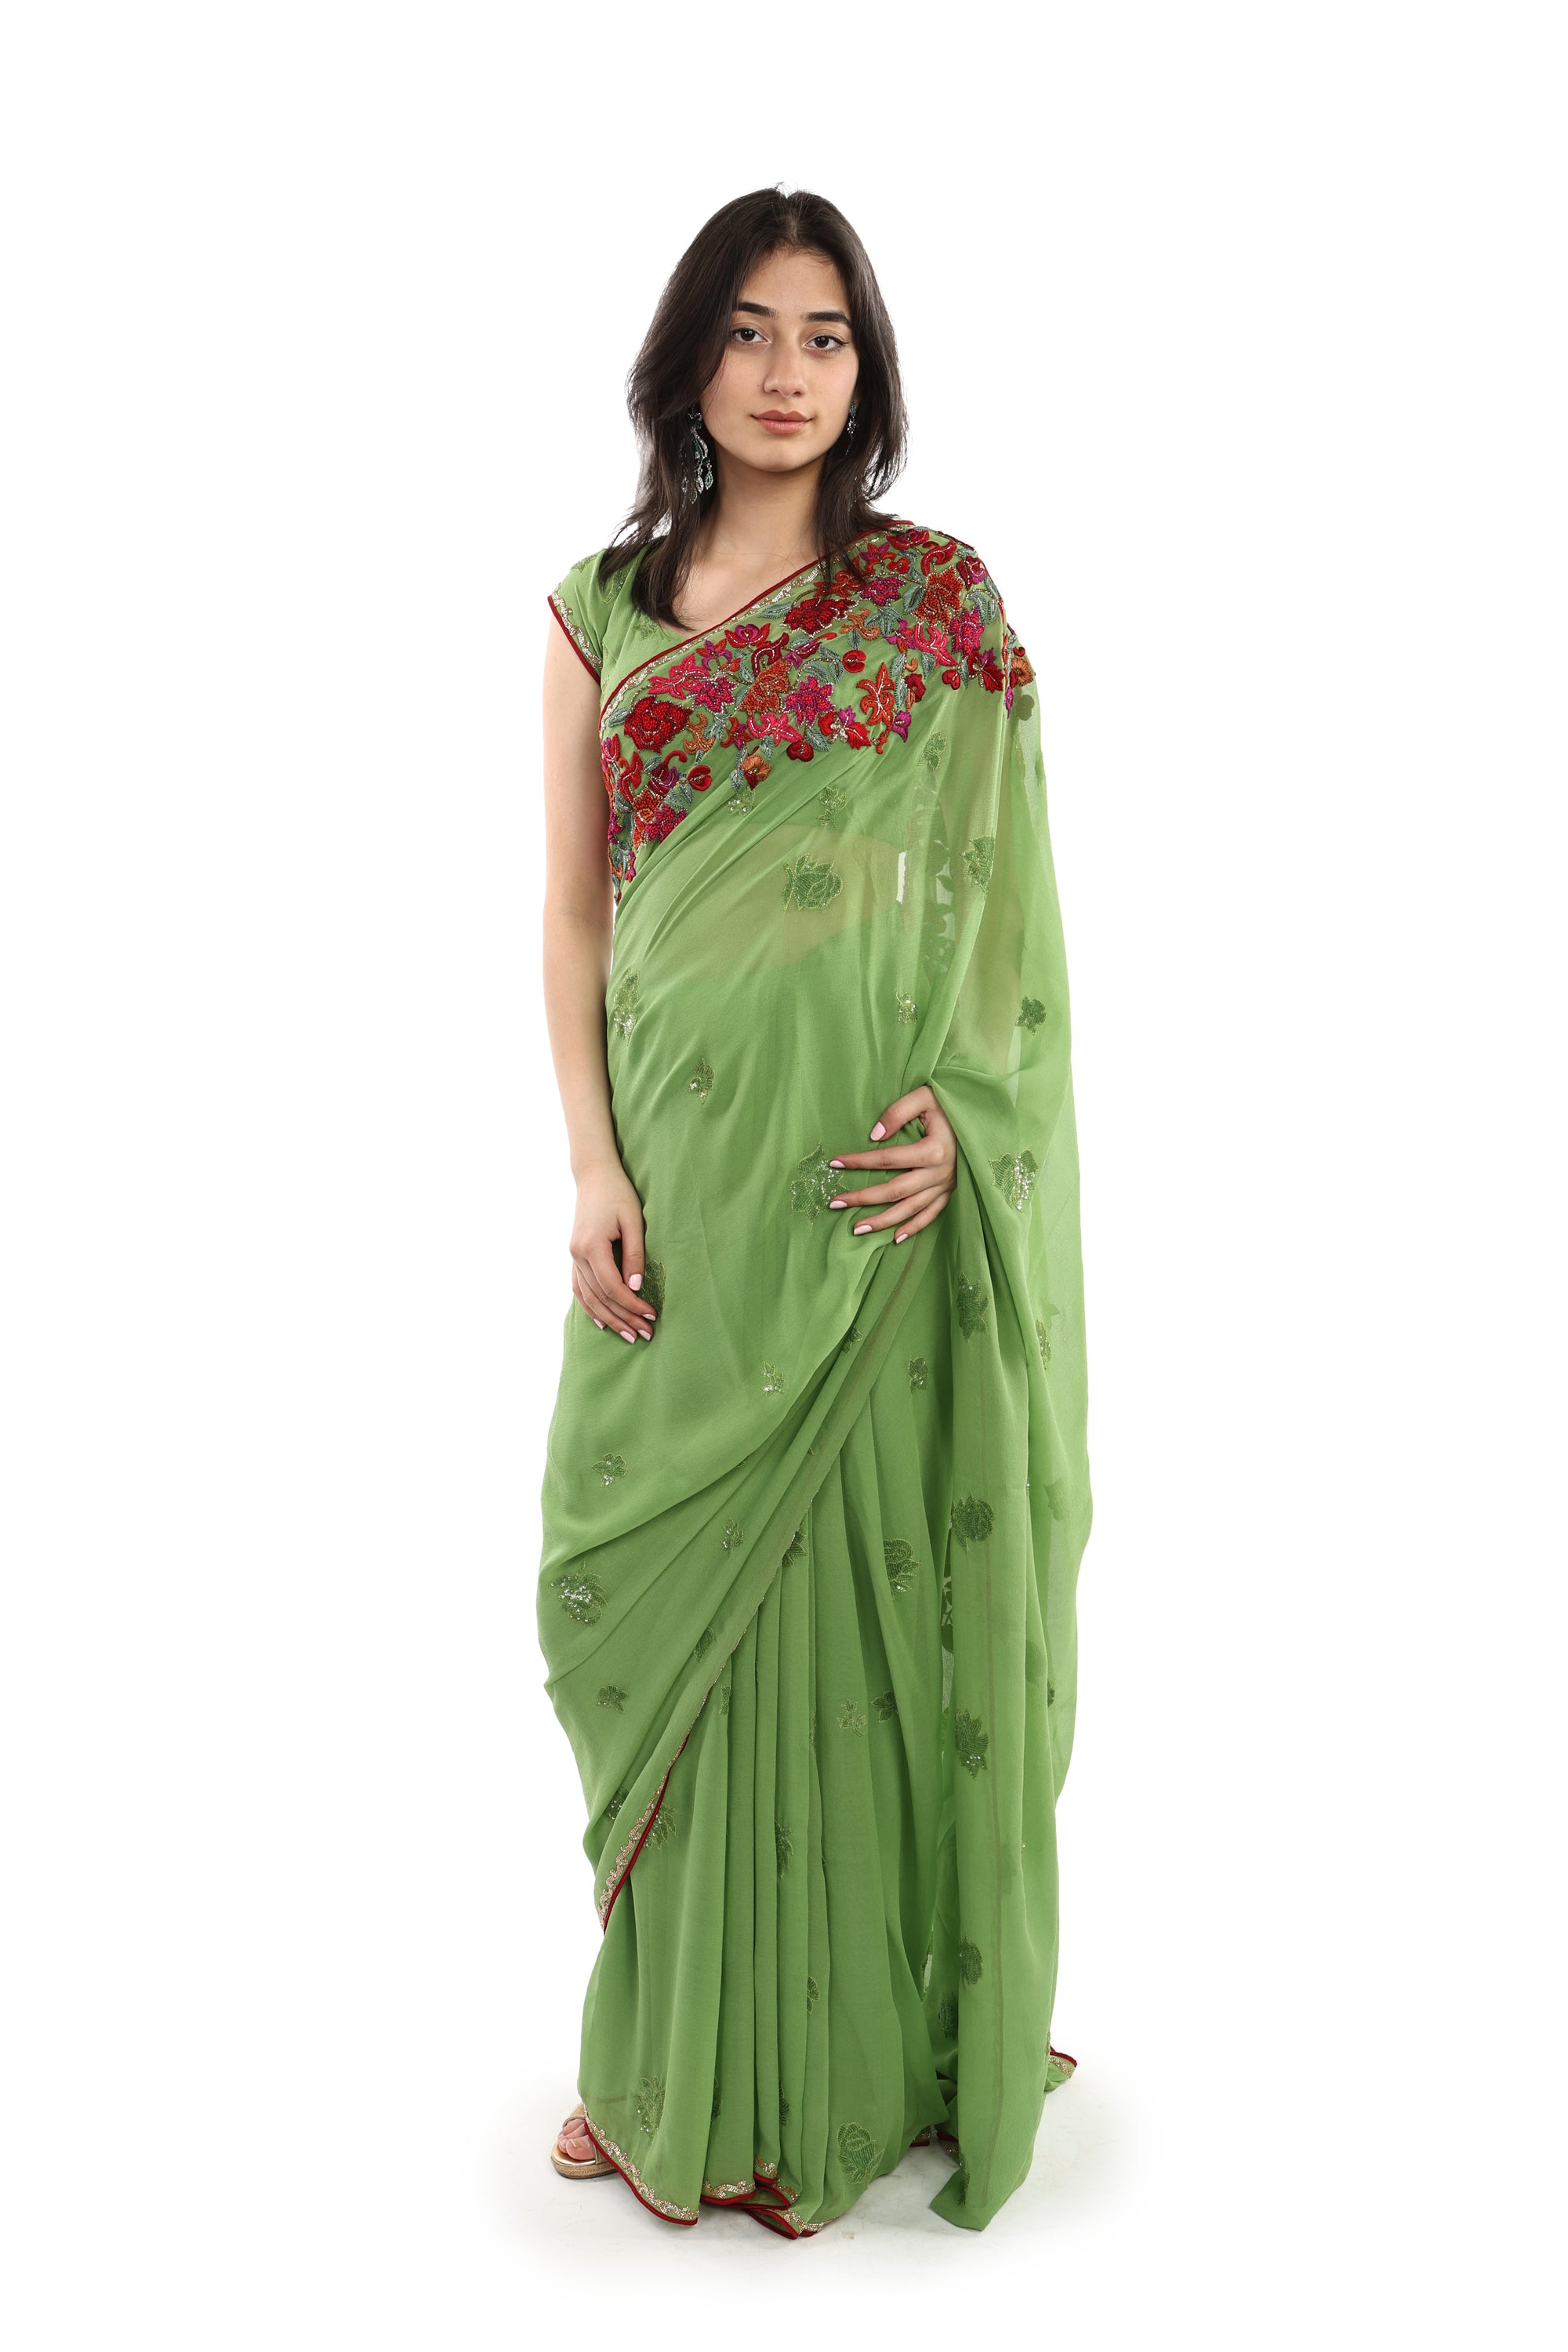 Green georgette saree/French knot embroidery/cut dana